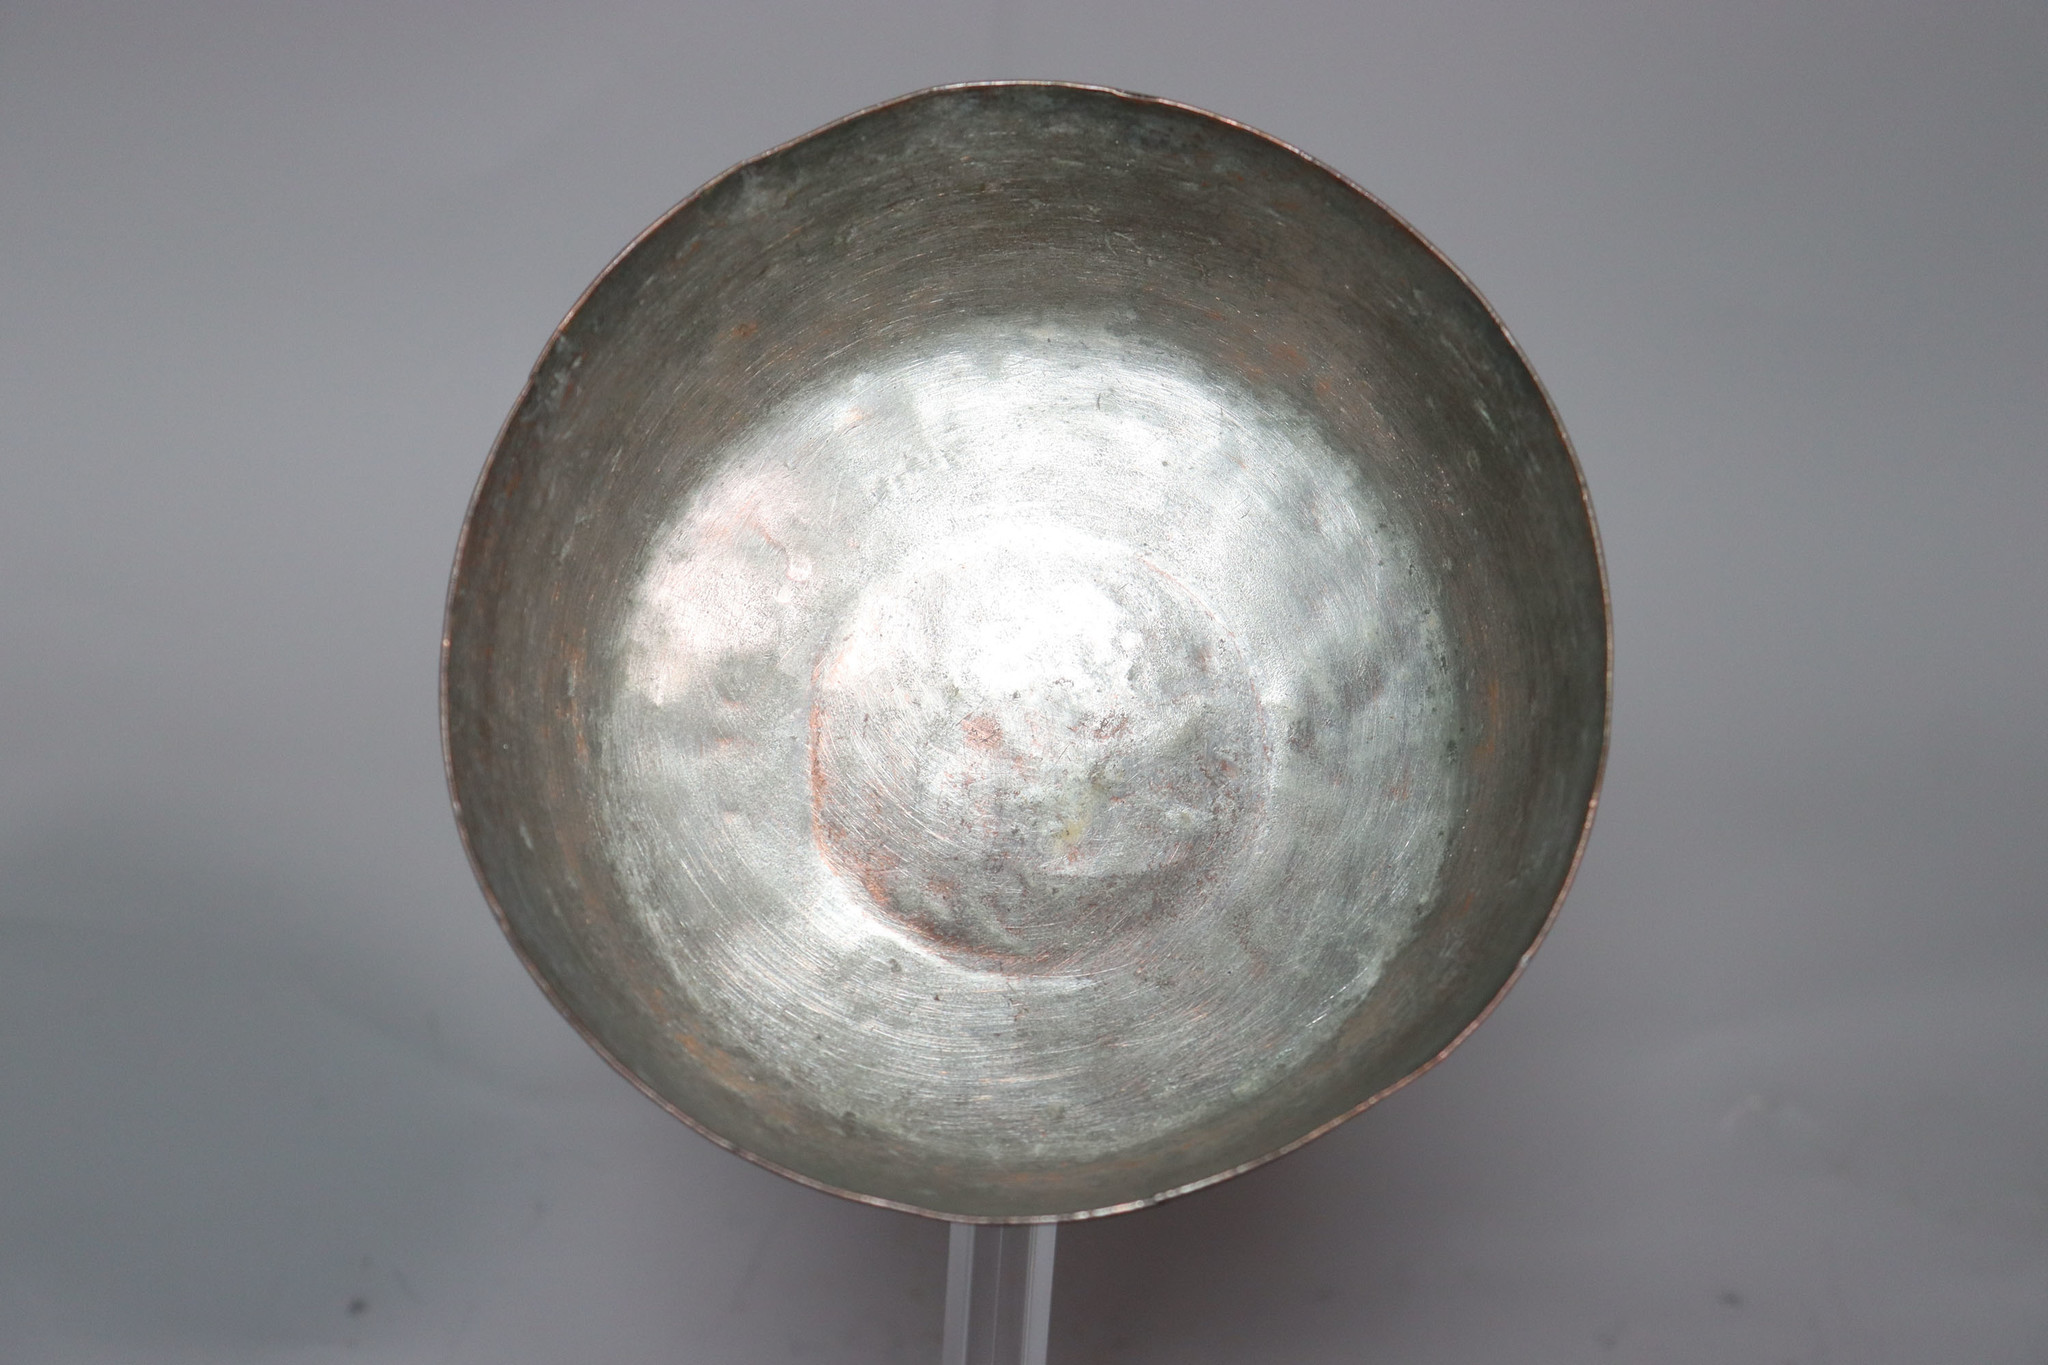 Antique  islamic Middle Eastern Tinned Copper  Engraved Bowl Jam No: 22/ 2